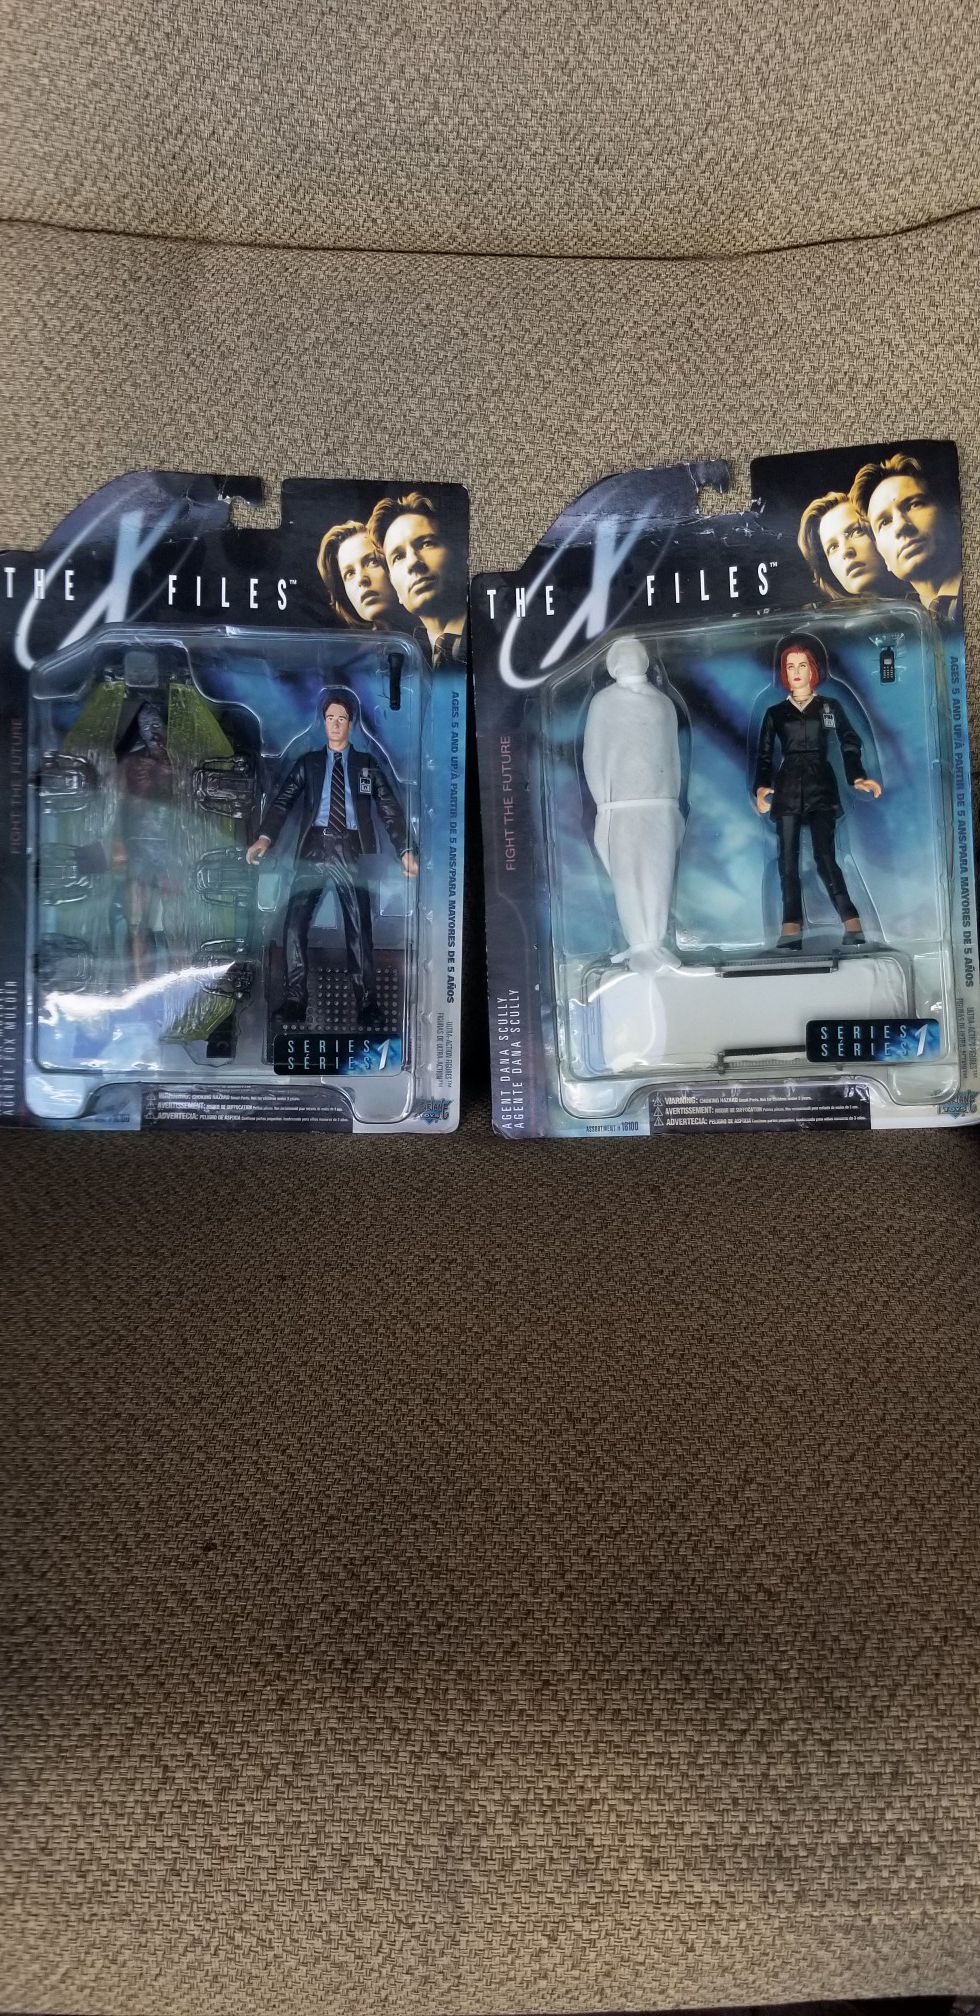 2 action figures from original X-files TV show